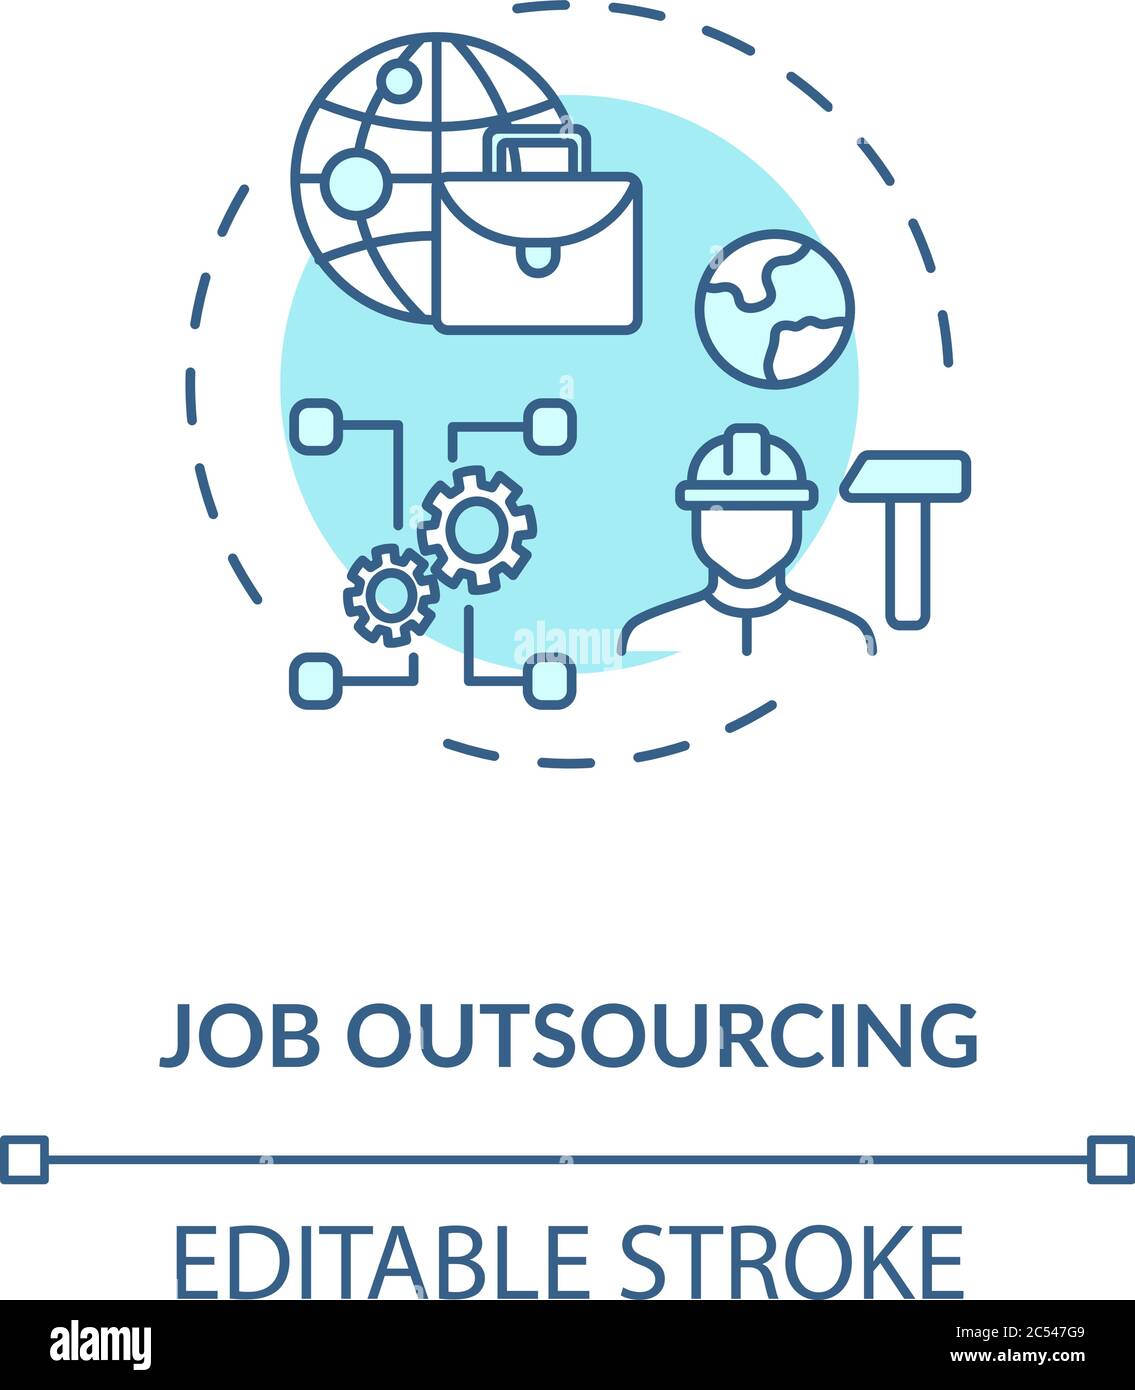 Job outsourcing turquoise concept icon Stock Vector